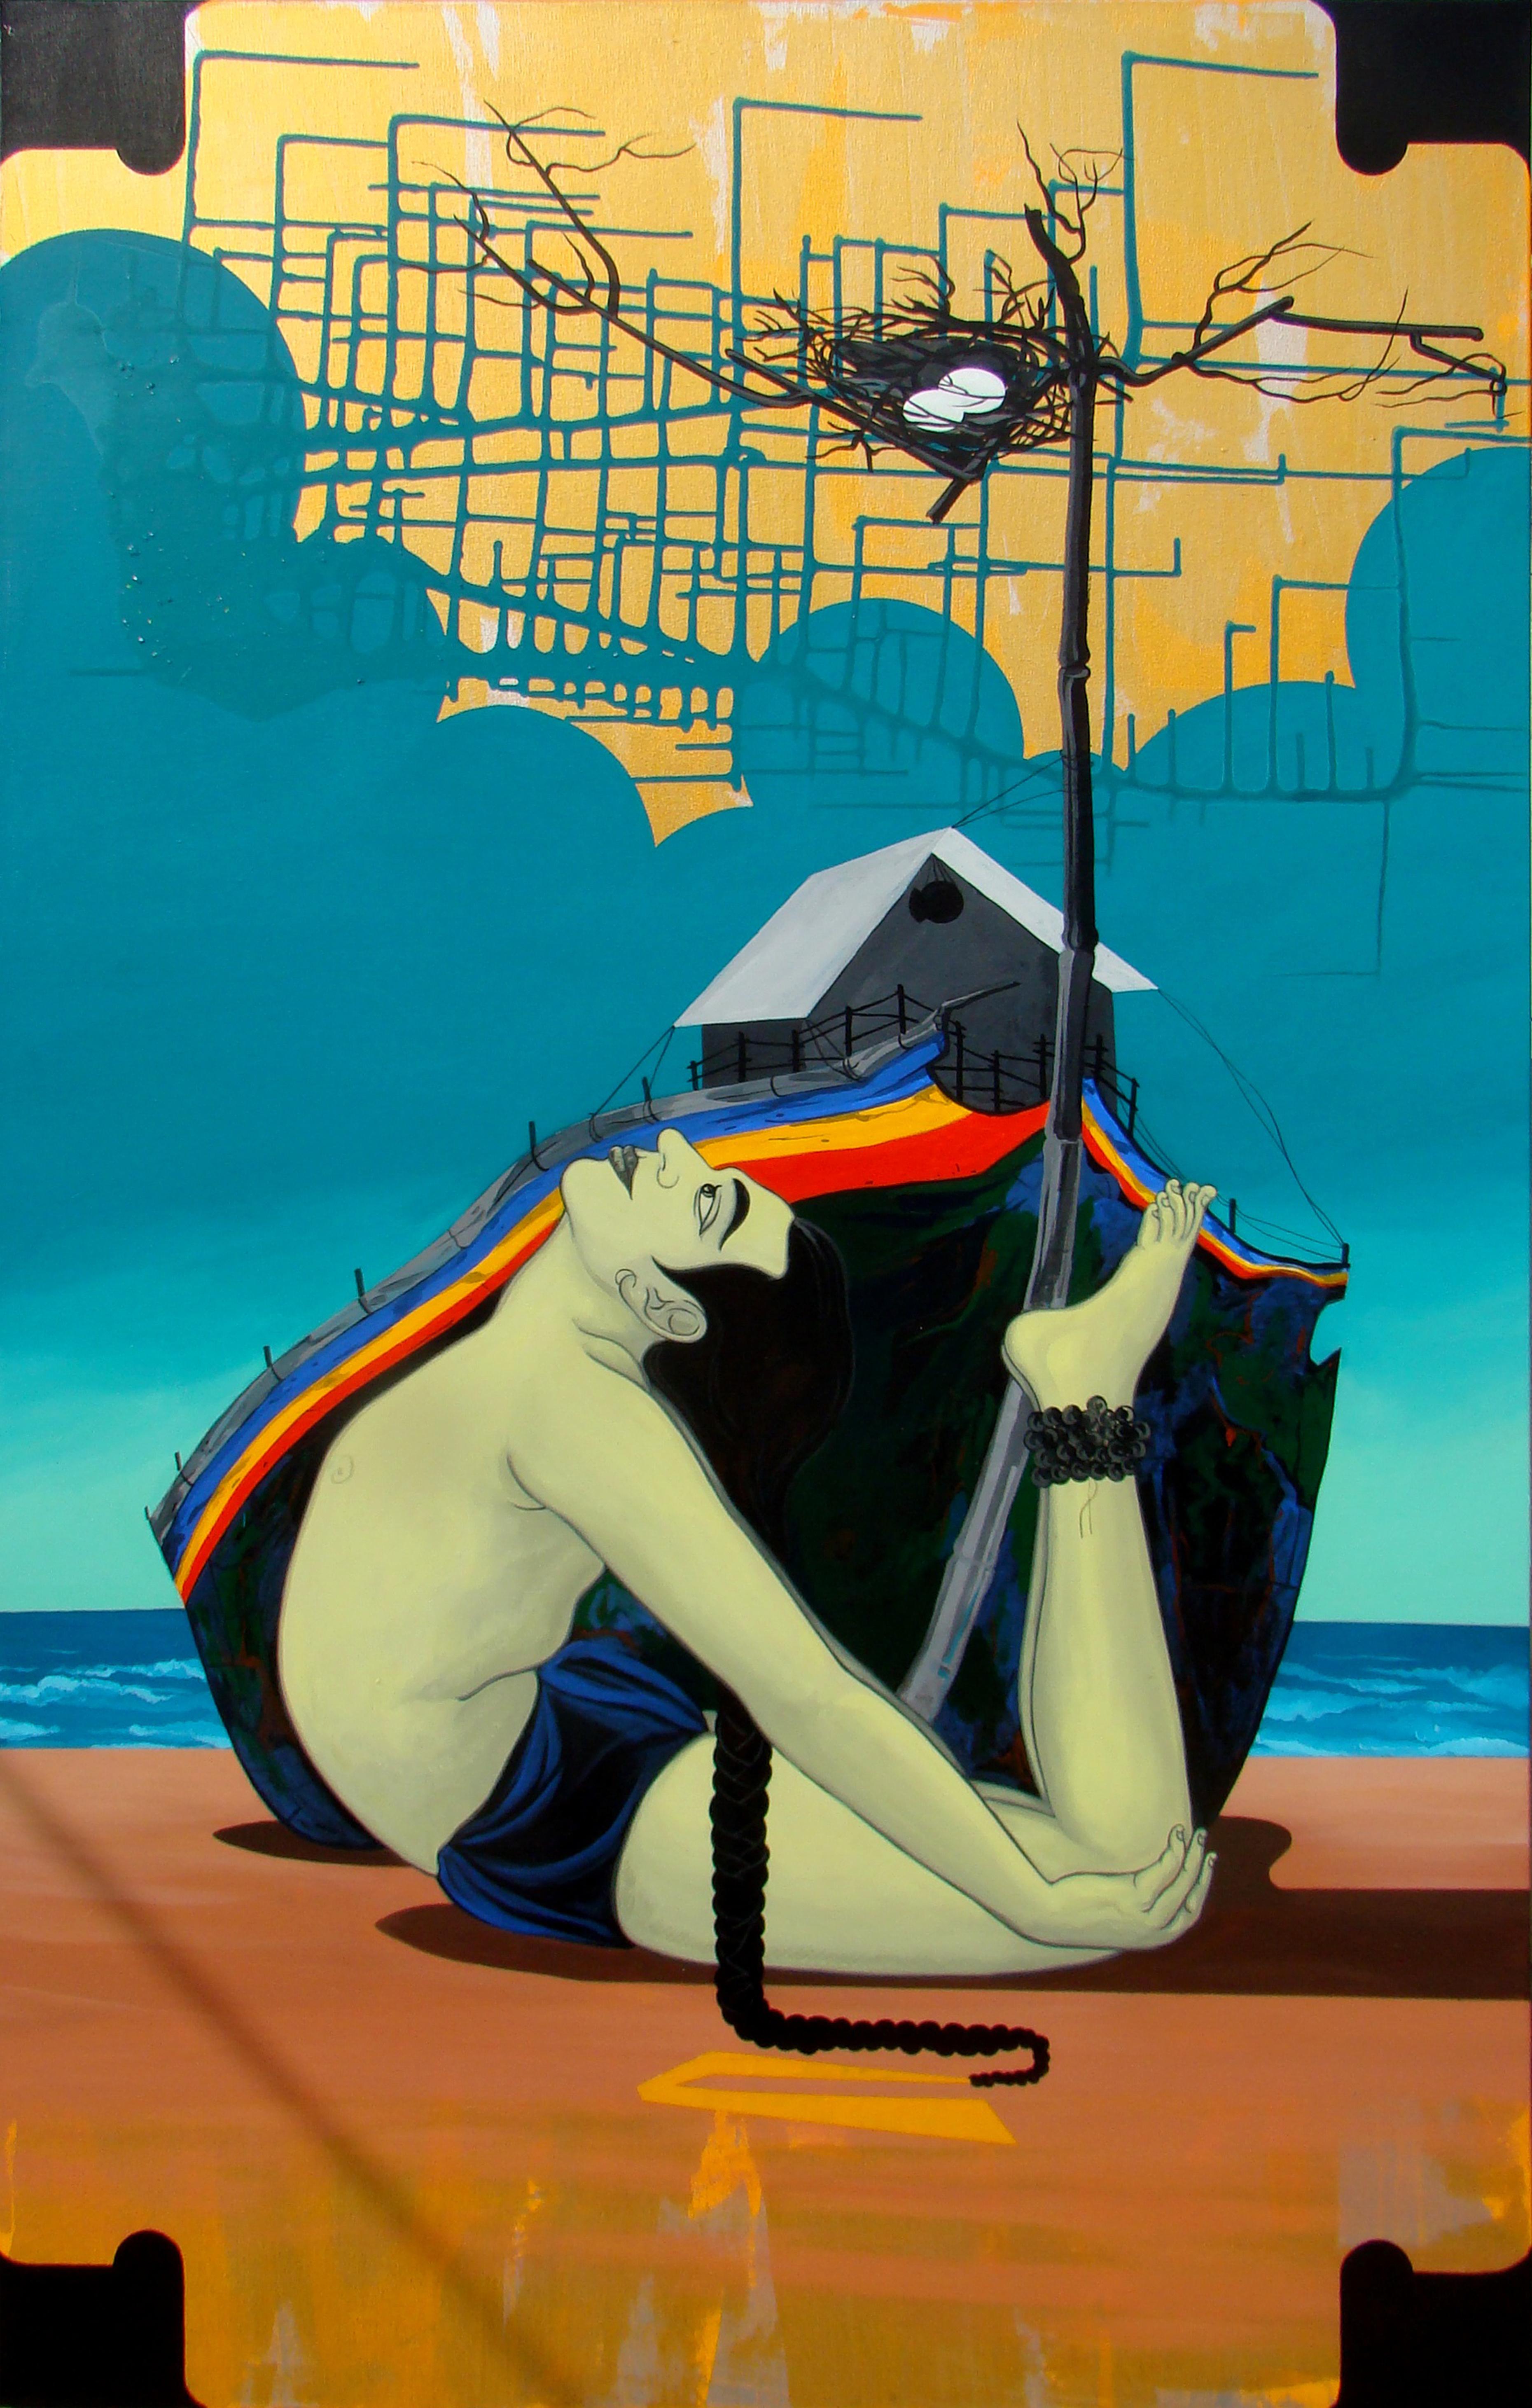 Re Vision, Acrylic on Canvas by Contemporary Indian Artist "In Stock"